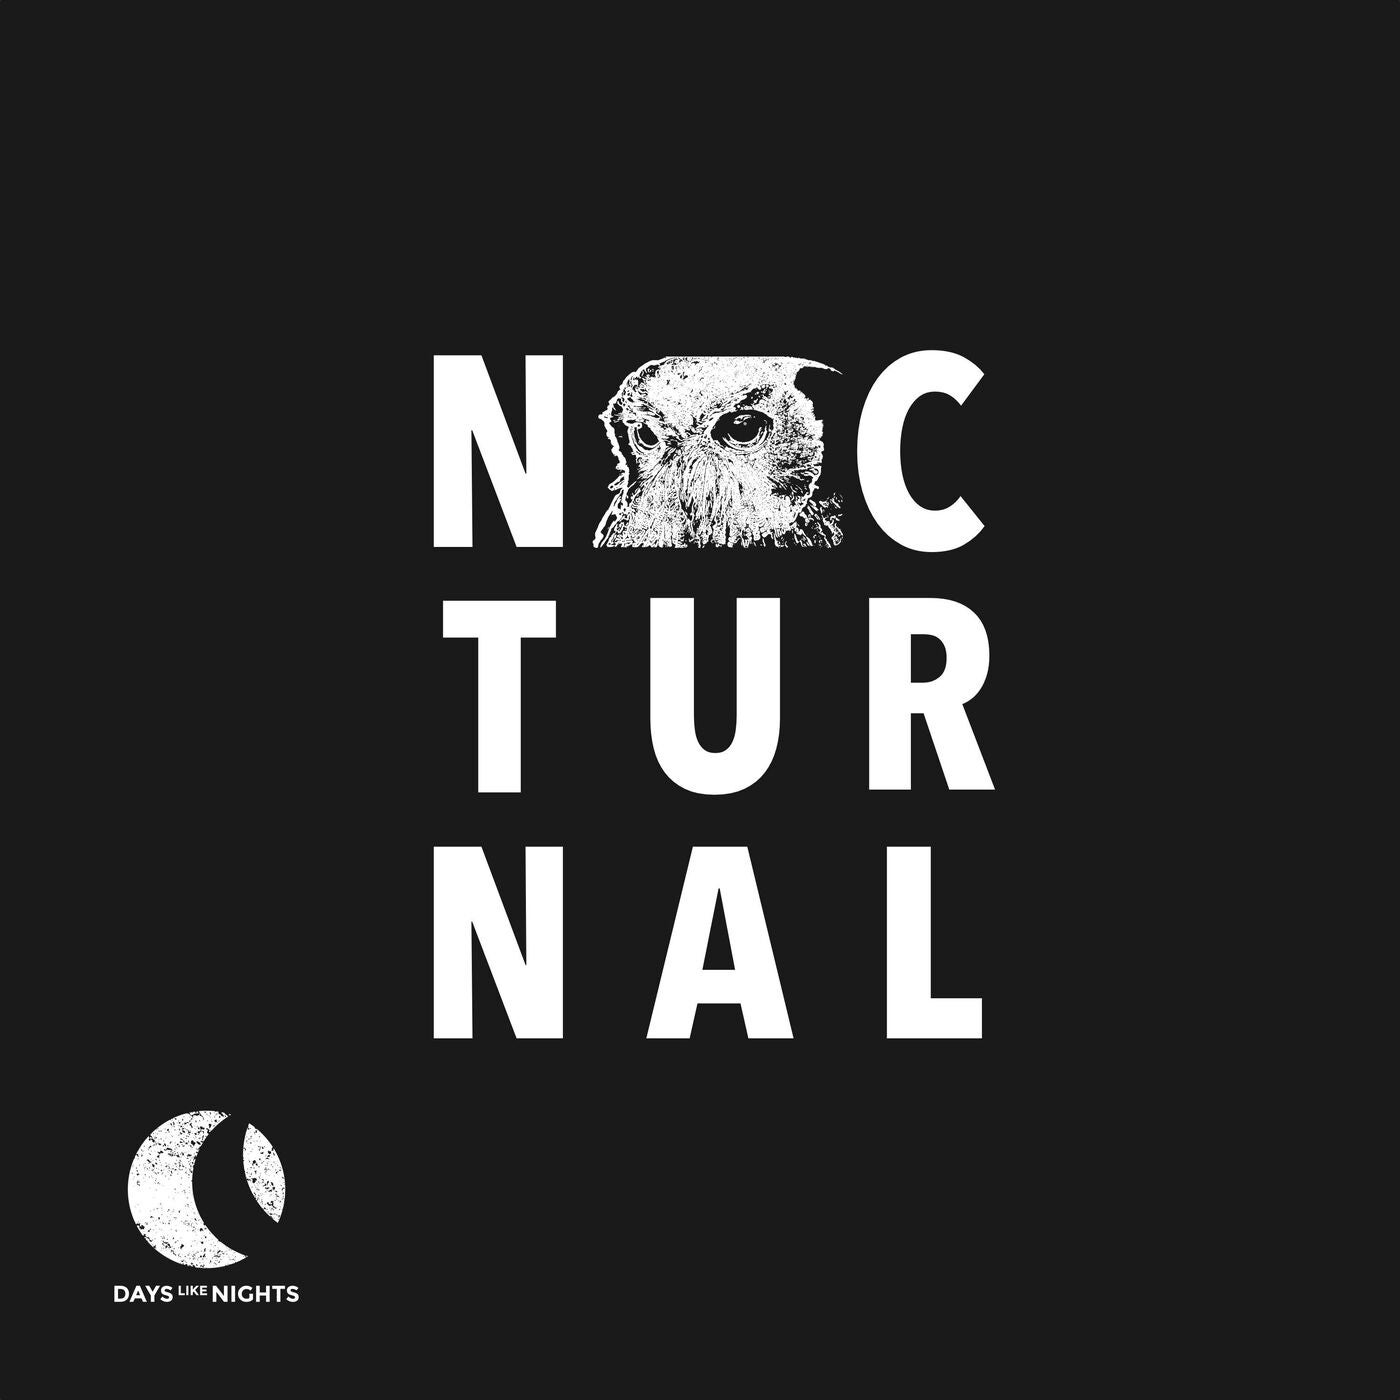 Nocturnal 012